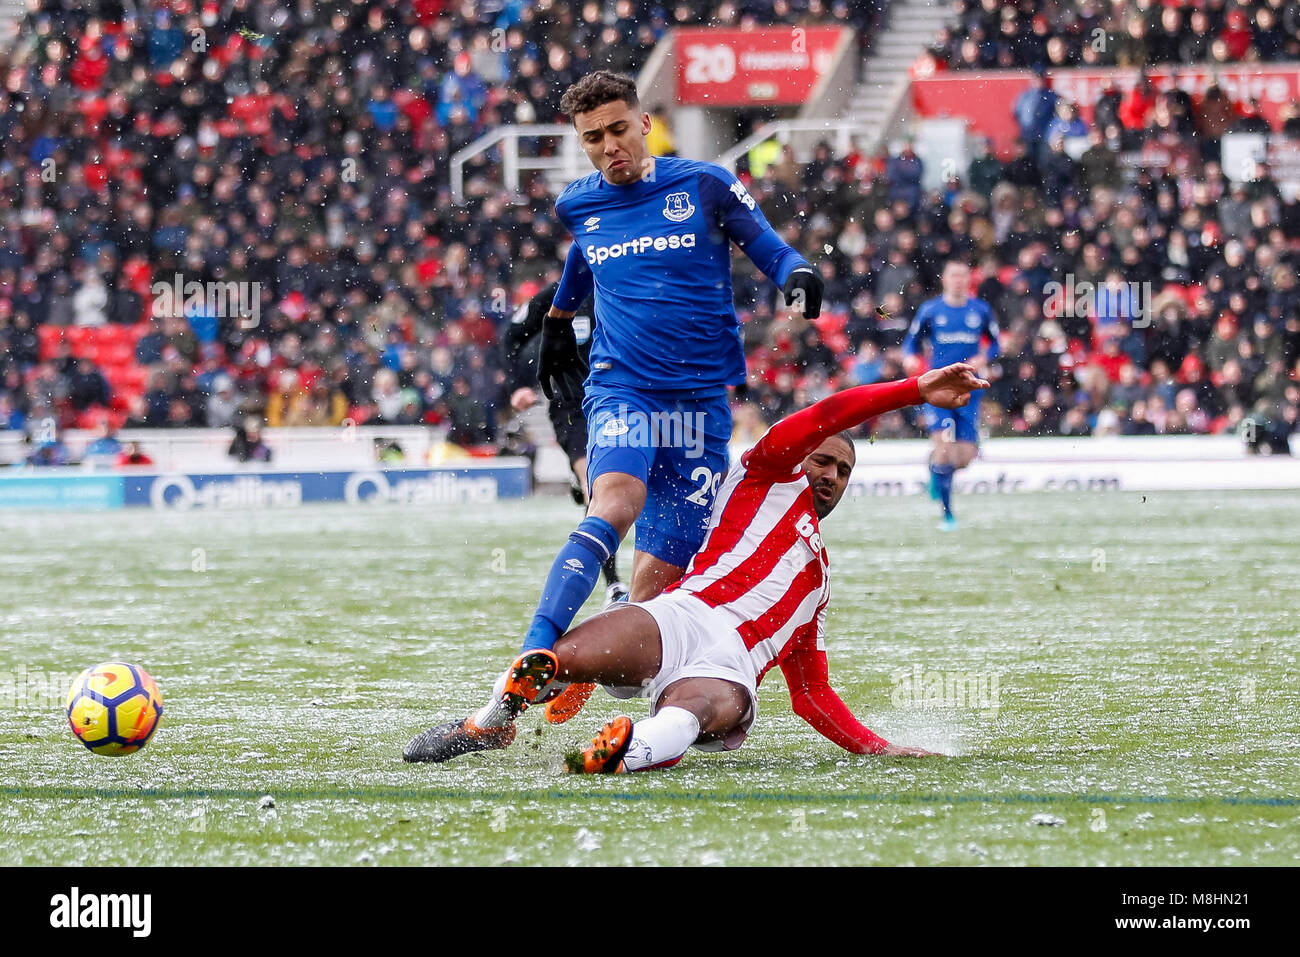 Dominic Calvert-Lewin of Everton and Glen Johnson of Stoke City during the Premier League match between Stoke City and Everton at Bet365 Stadium on March 17th 2018 in Stoke-on-Trent, England. (Photo by Daniel Chesterton/phcimages.com) Stock Photo